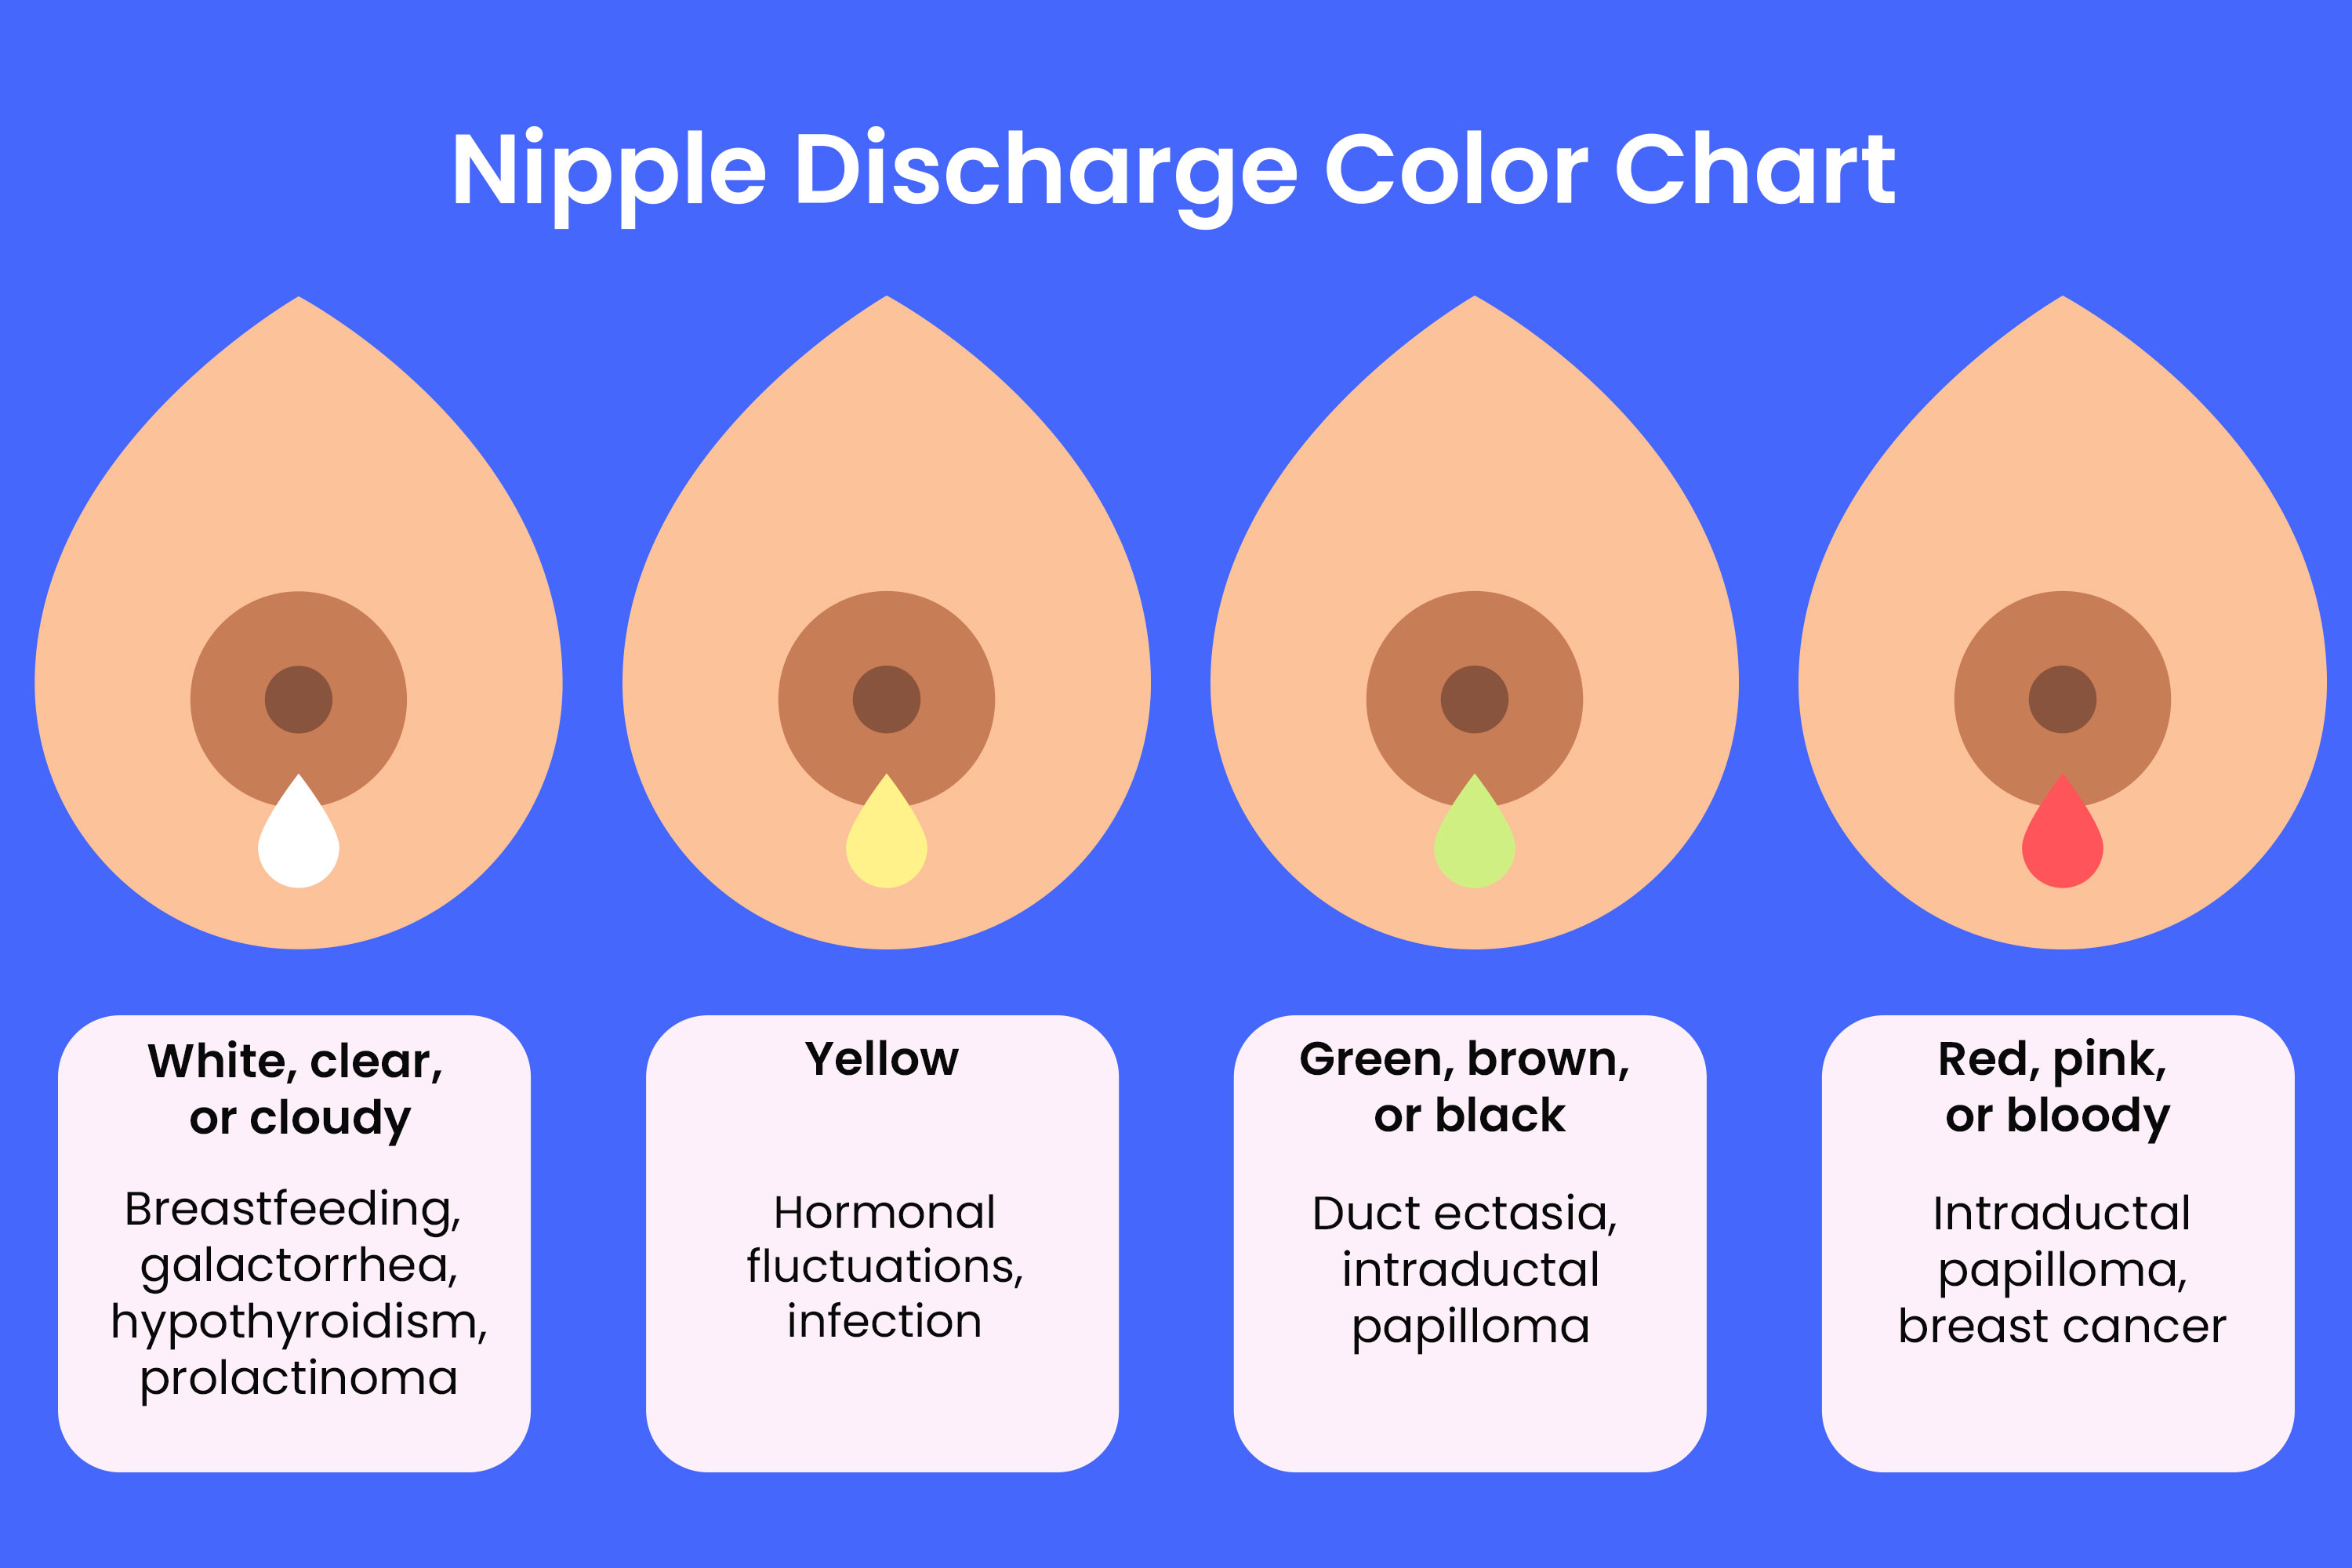 Why Are My Nipples Itchy? Itchy Nipple Causes, Prevention, & Treatment